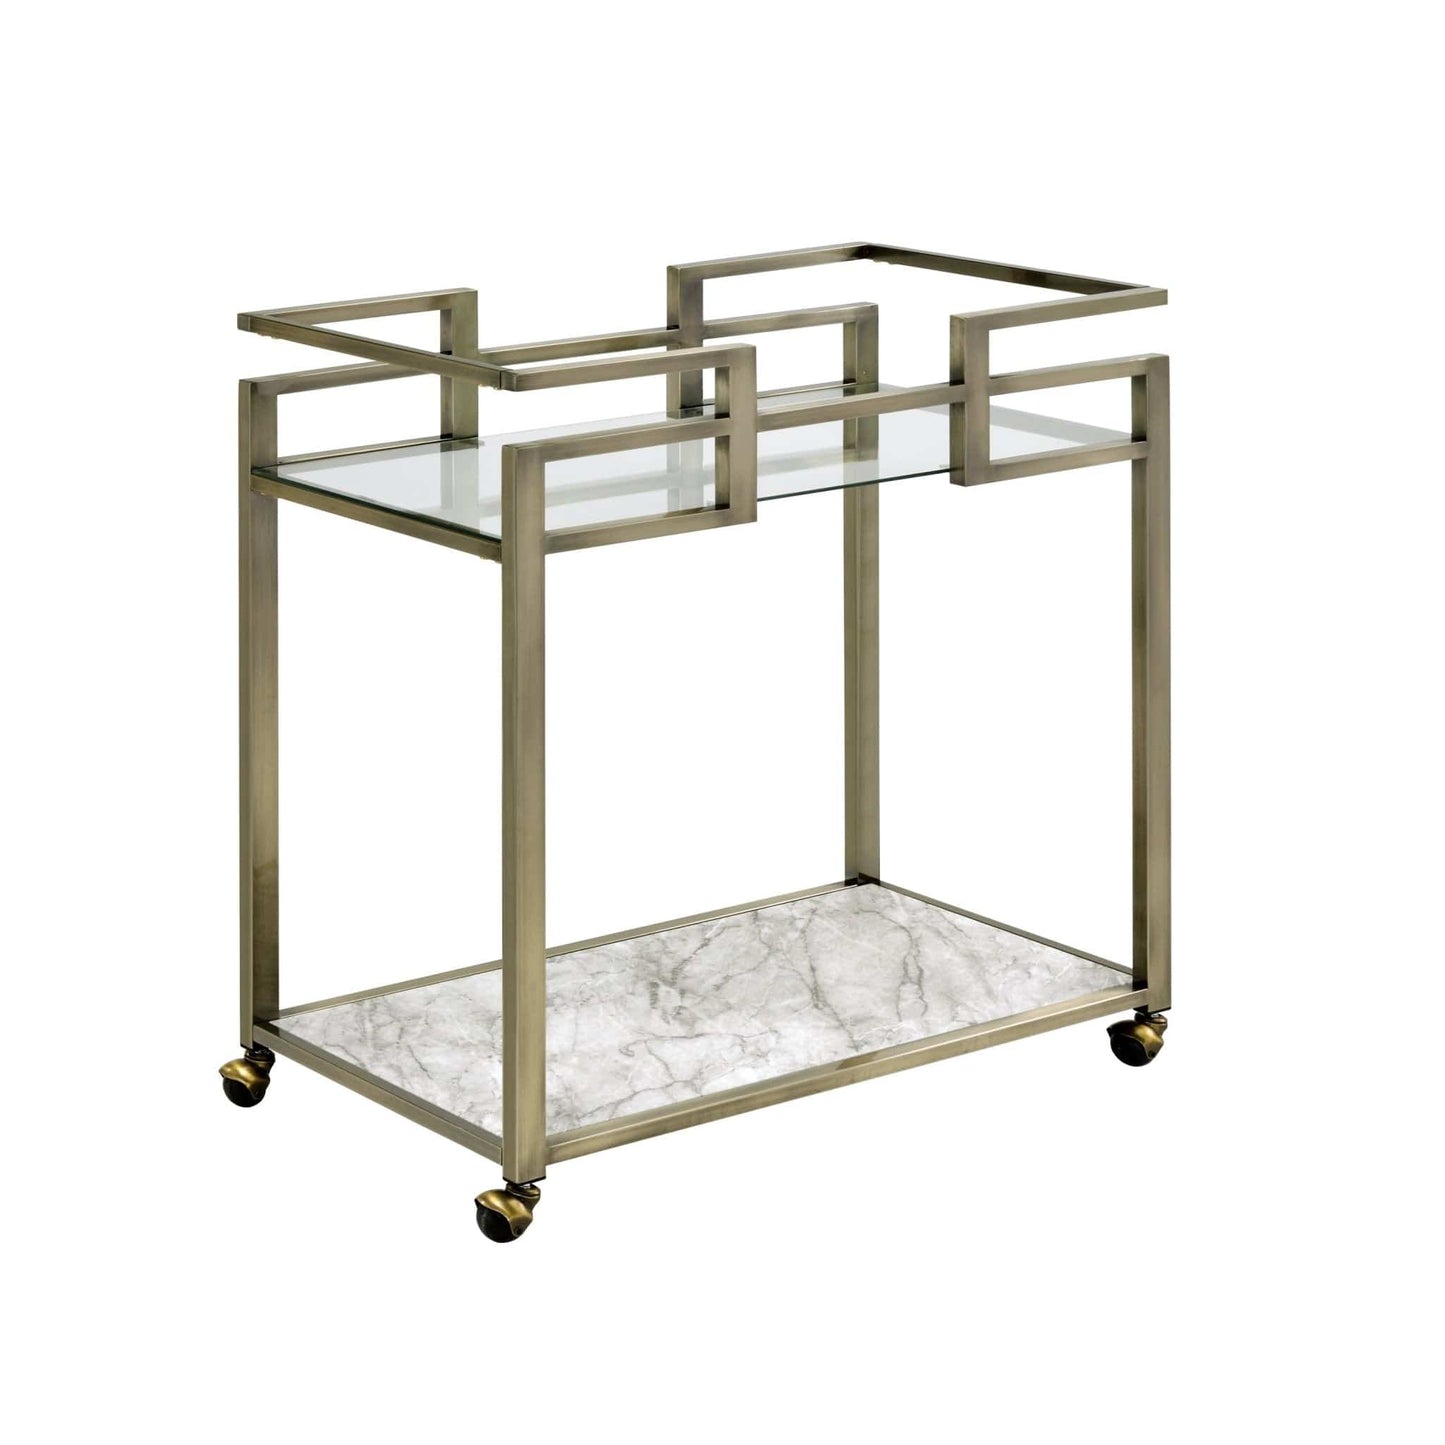 ACME Neilo Serving Cart in Clear Glass, Faux Marble & Wire Brass Finish AC00159 - CLASSY CLOSET BOUTIQUEACME Neilo Serving Cart in Clear Glass, Faux Marble & Wire Brass Finish AC00159AC00159